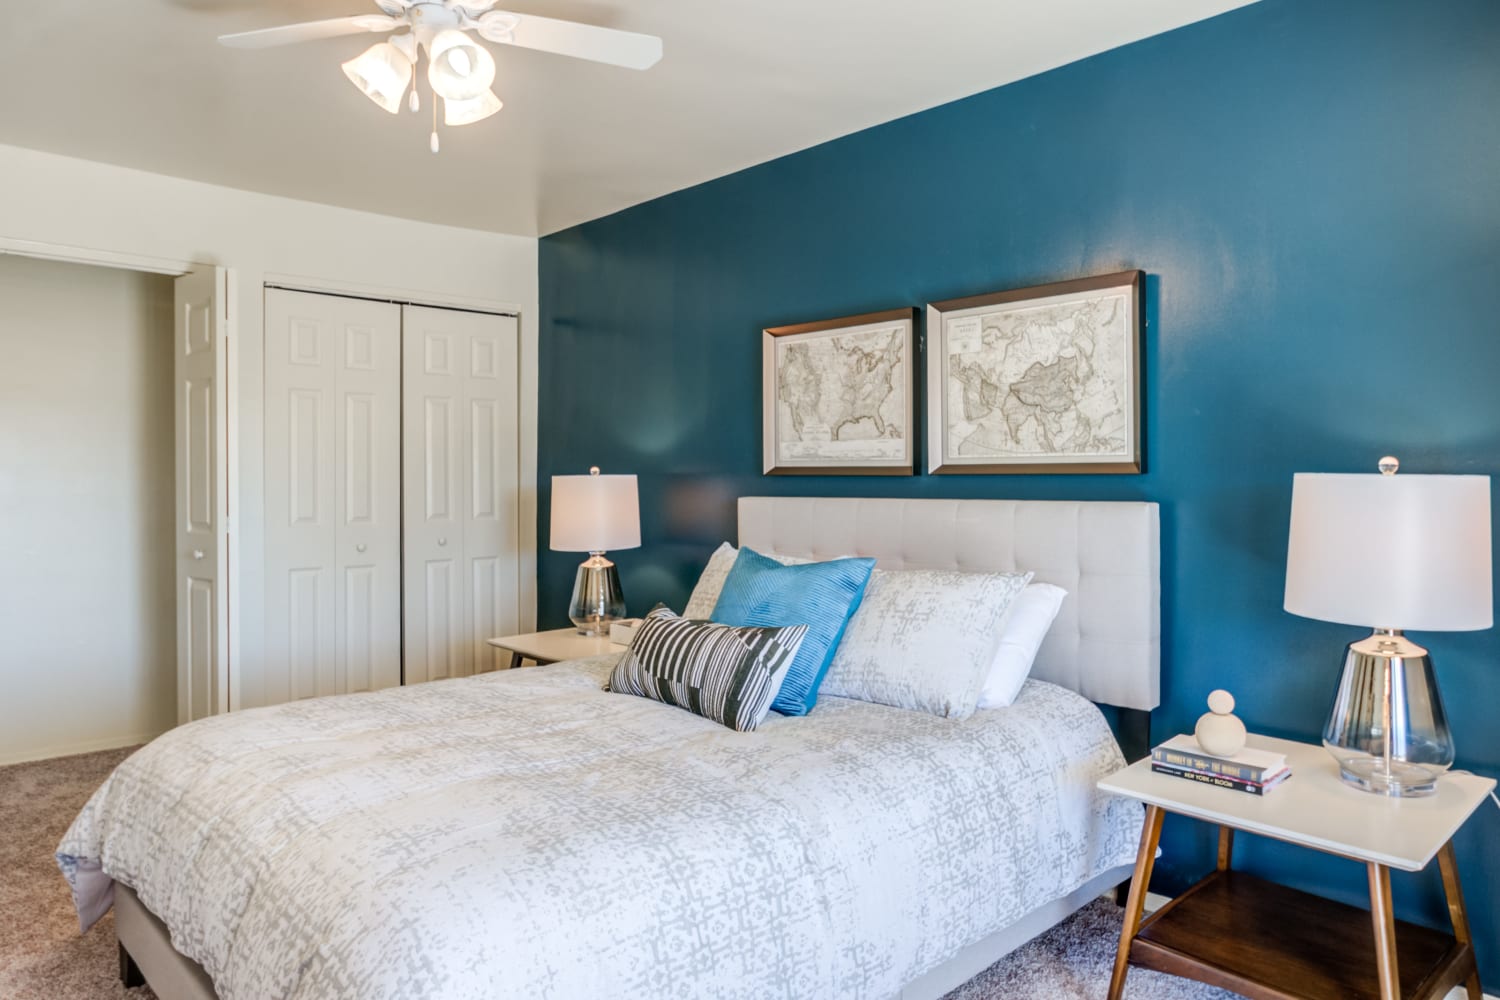 Master bedroom with a ceiling fan at Greentree Village Townhomes in Lebanon, Pennsylvania